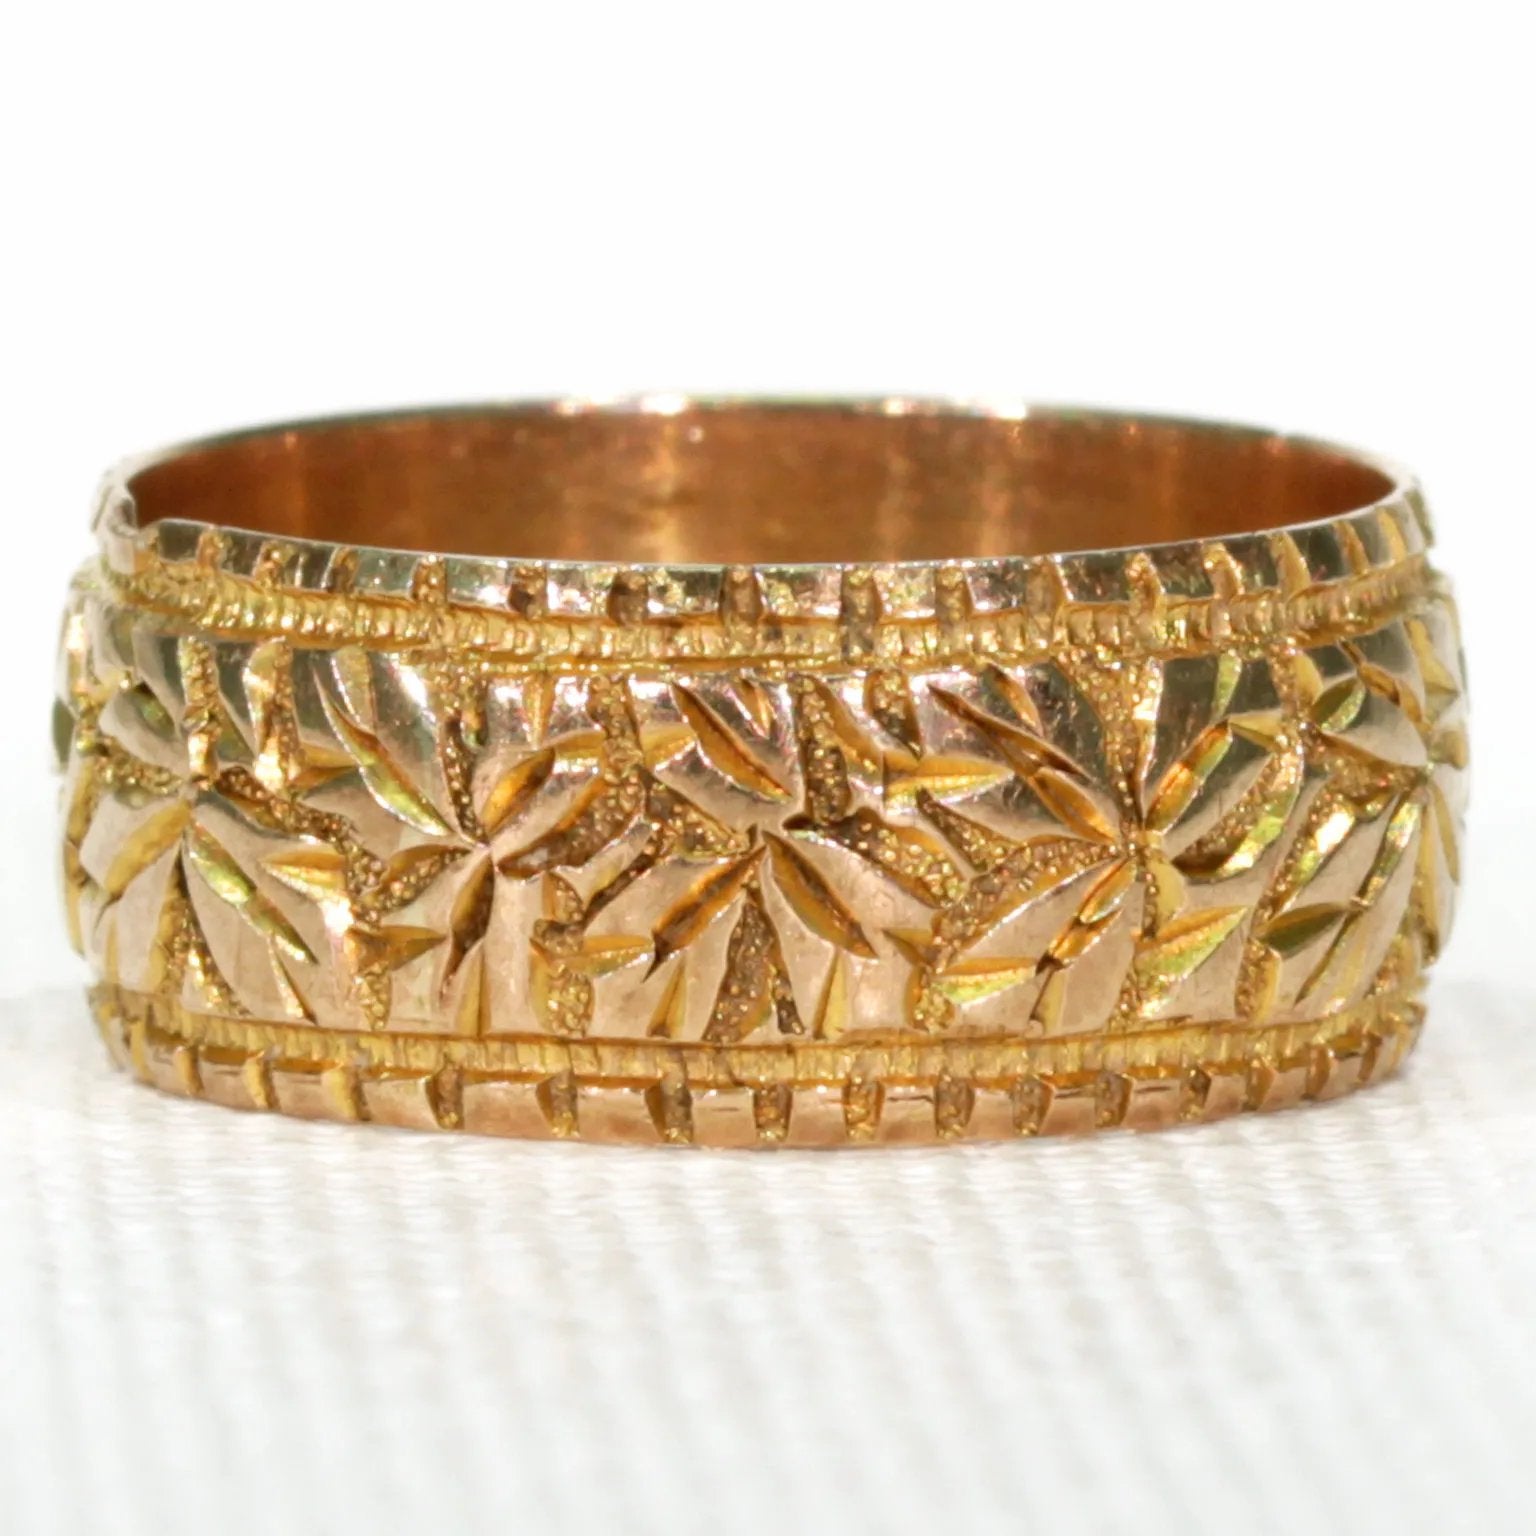 Victorian Leaves 9k Gold Wedding Band Ring Sz 6